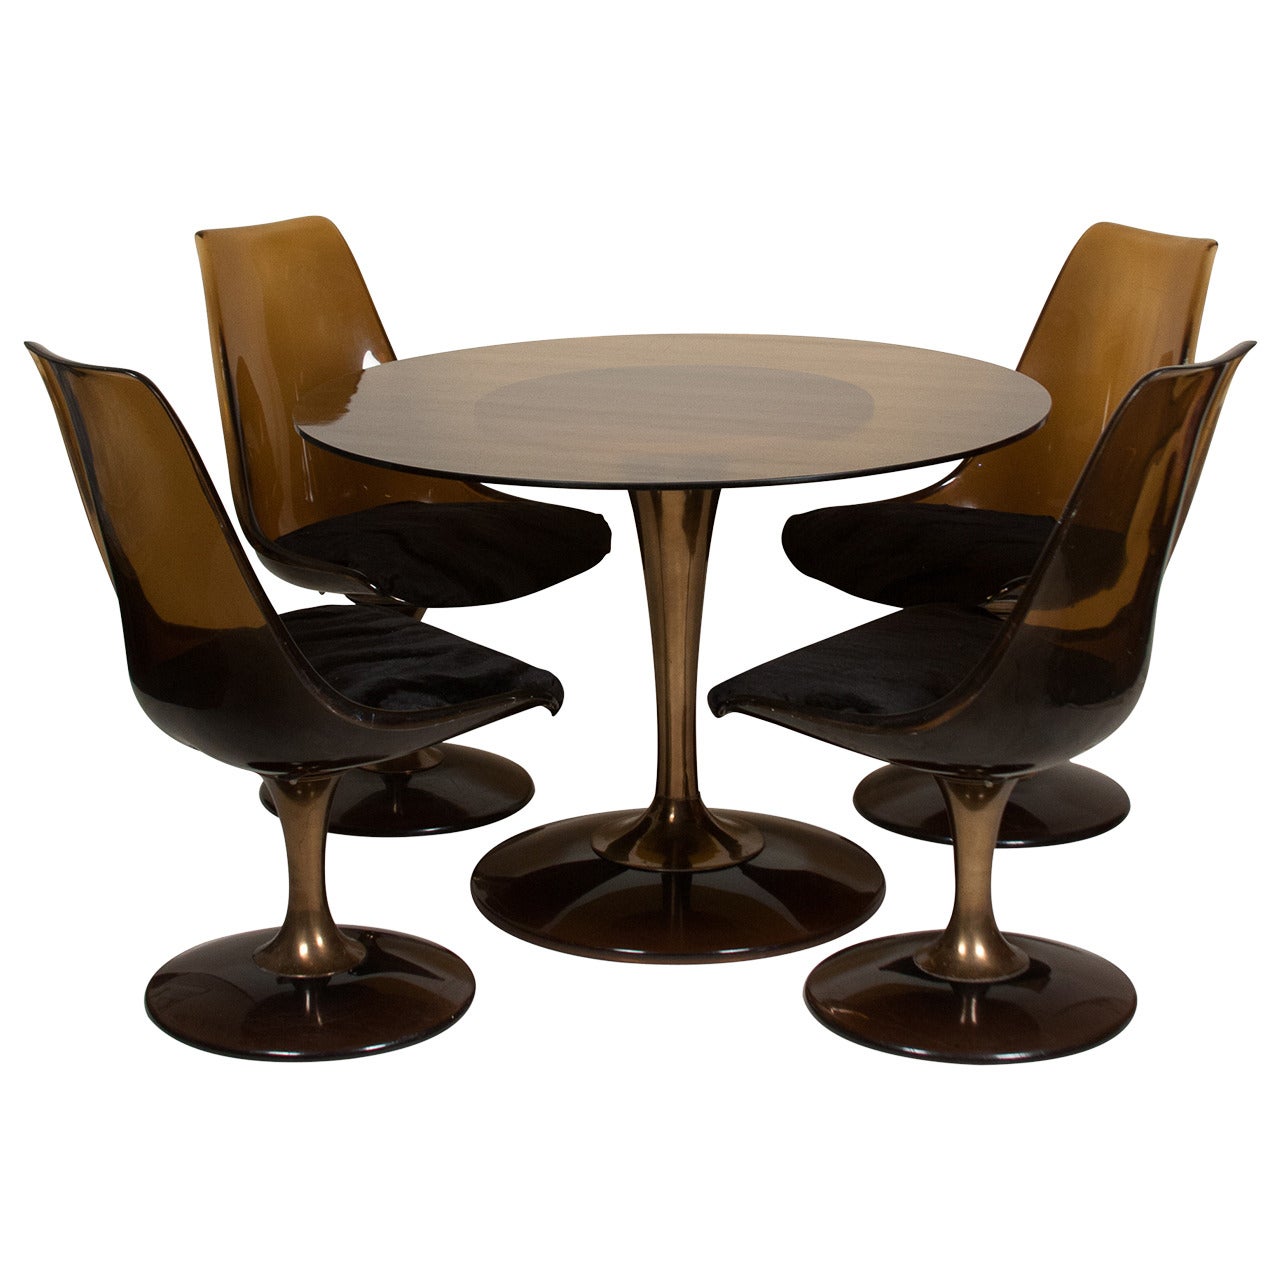 Amber Glass-Top Tulip Dining Table and Chairs For Sale